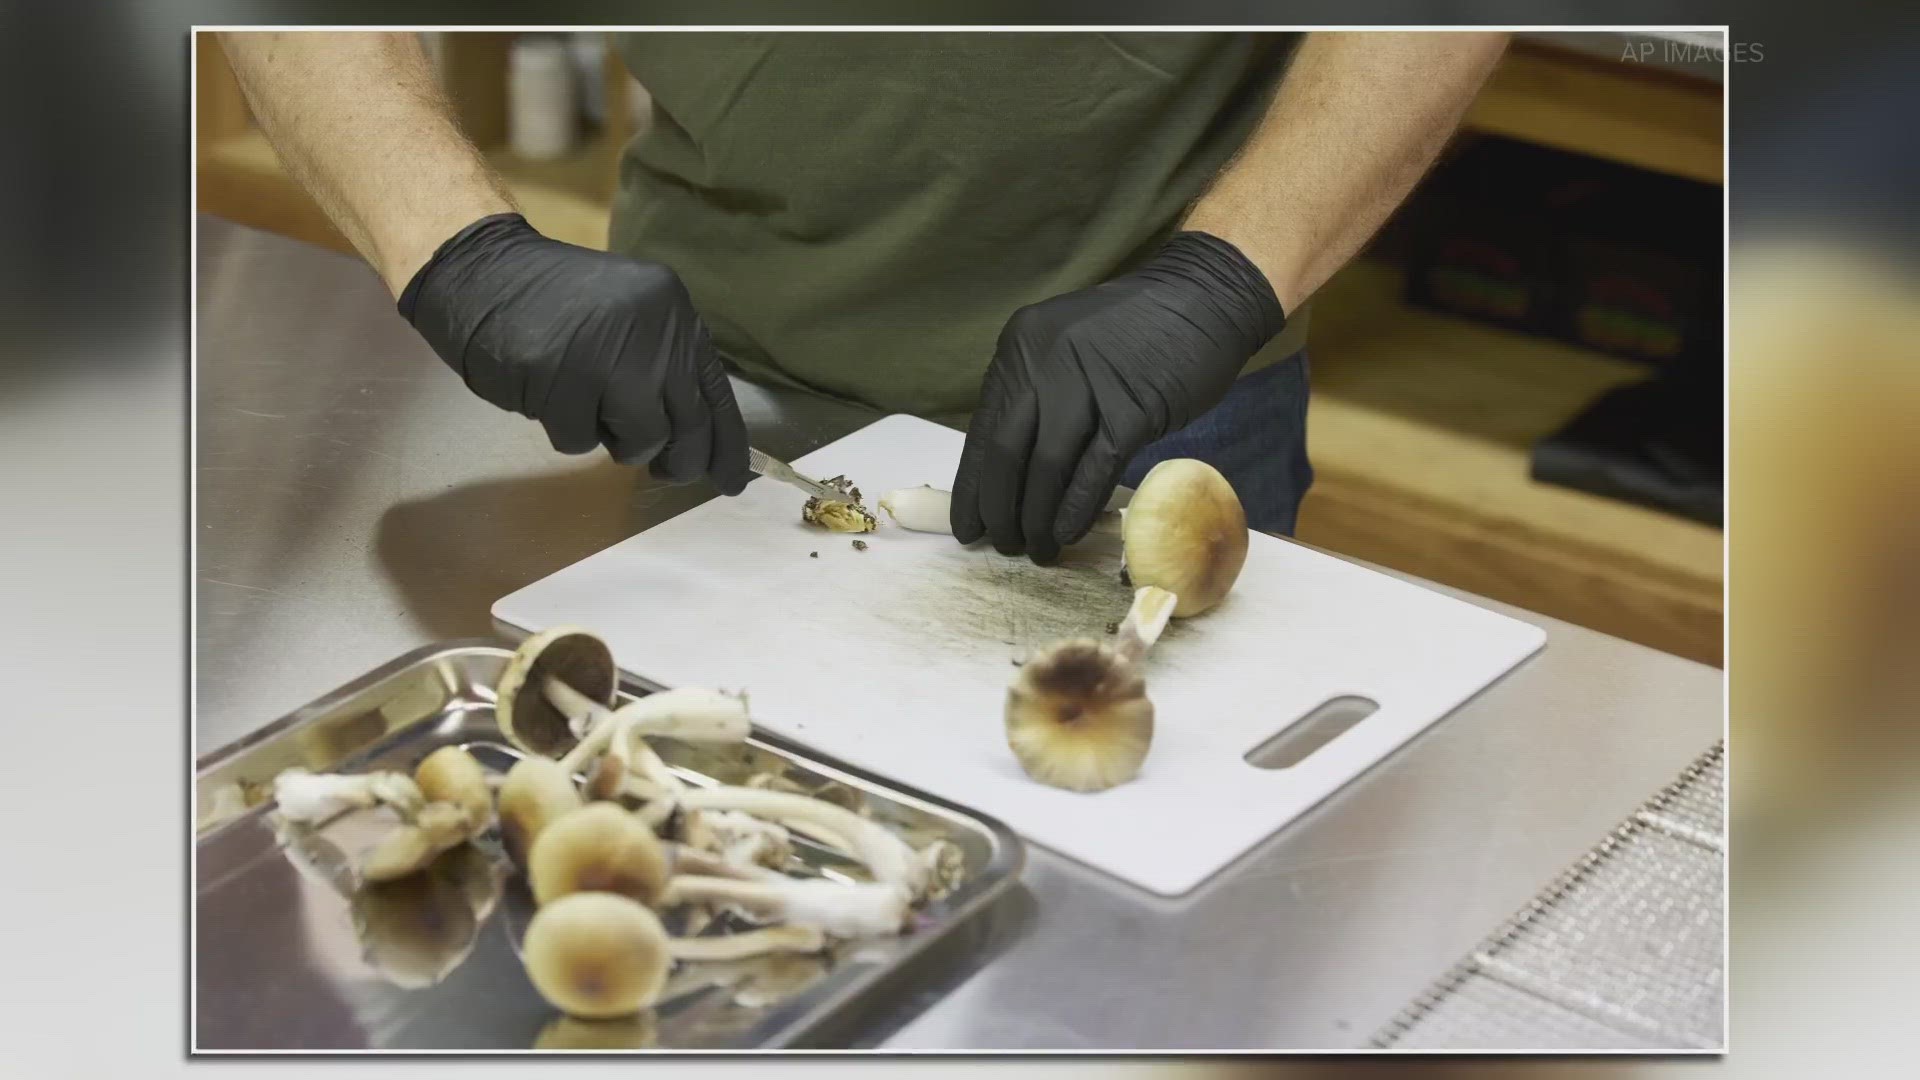 Lawmakers are working to decide whether or not to invest $42 million into research for ibogaine, a natural psychoactive compound in mushrooms.